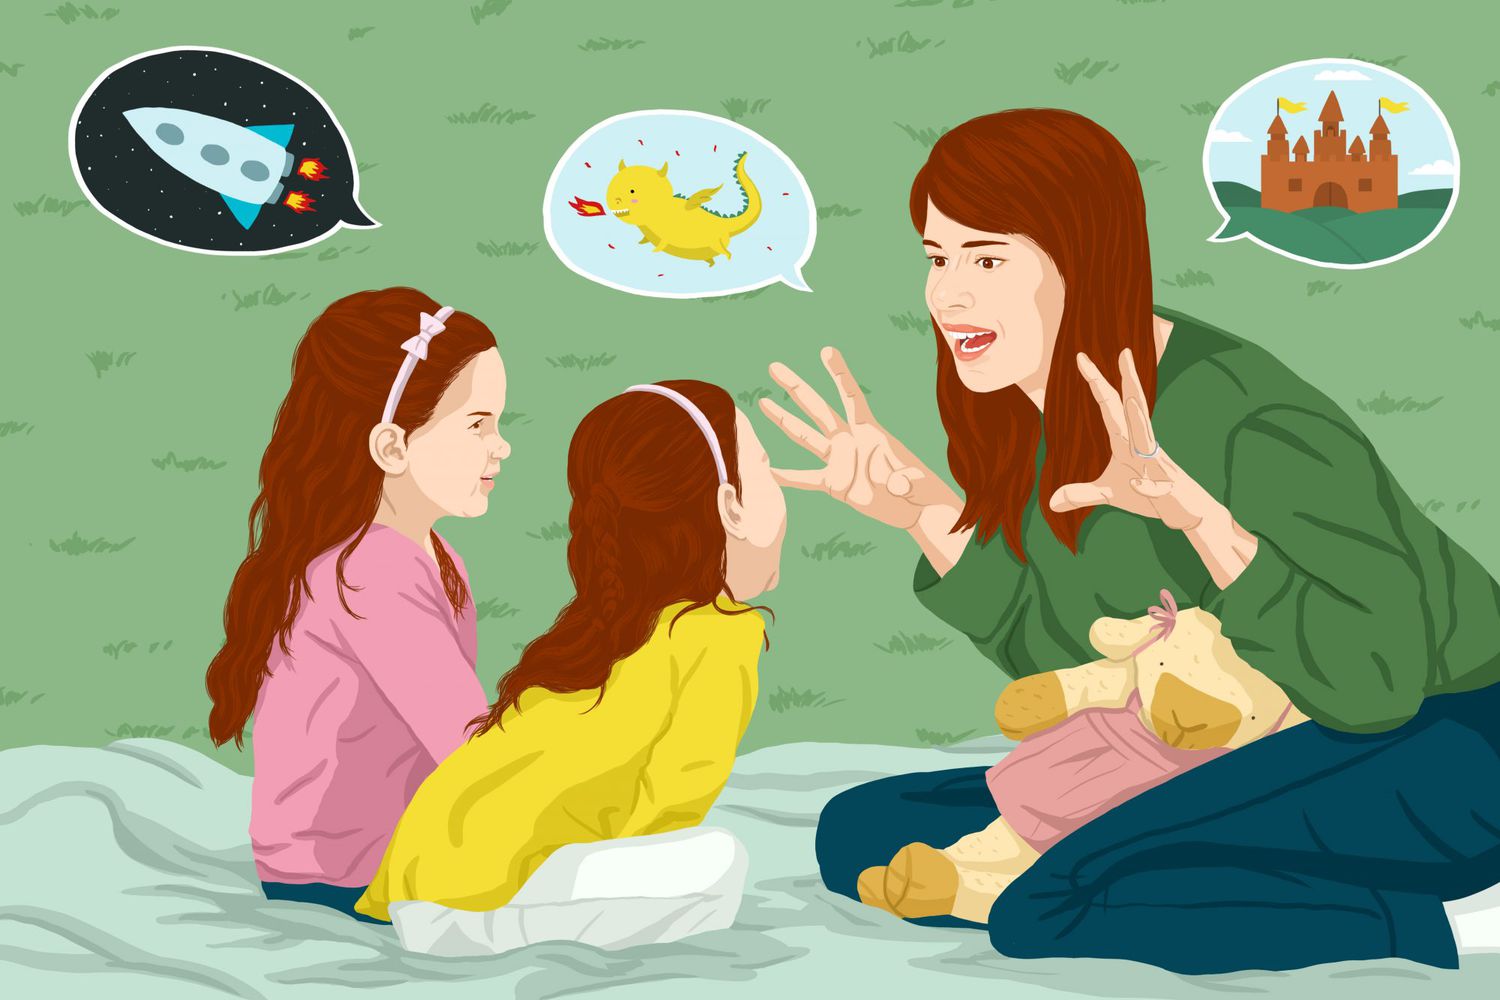 illustration of mother telling story to her kids, speech bubbles have pictures of castles, dragon rocket ship